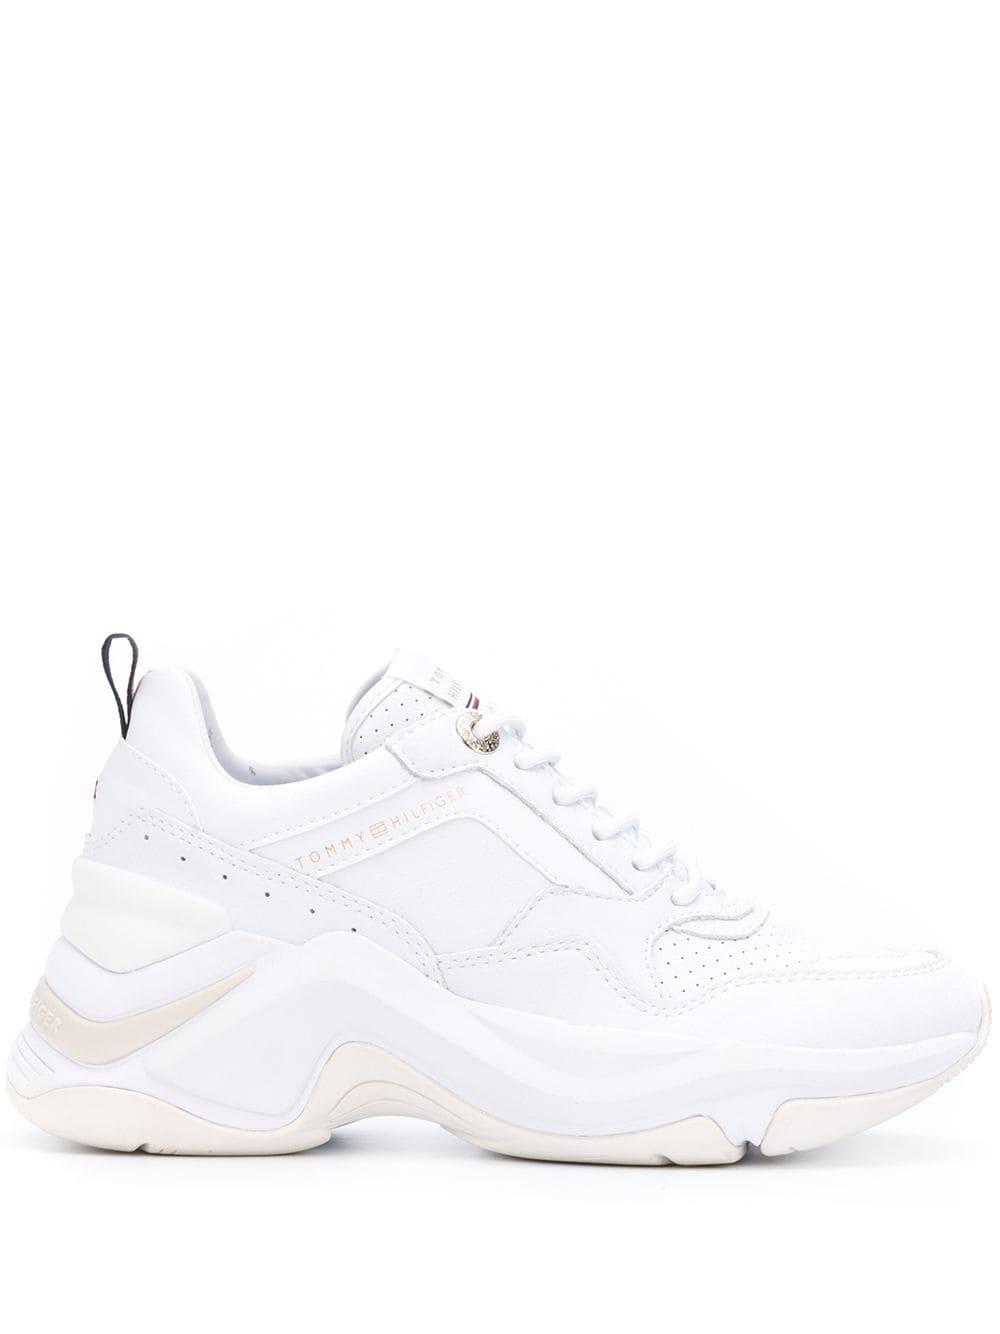 Tommy Hilfiger Leather Chunky Sole Internal Wedge Sneakers in White | Lyst  Canada